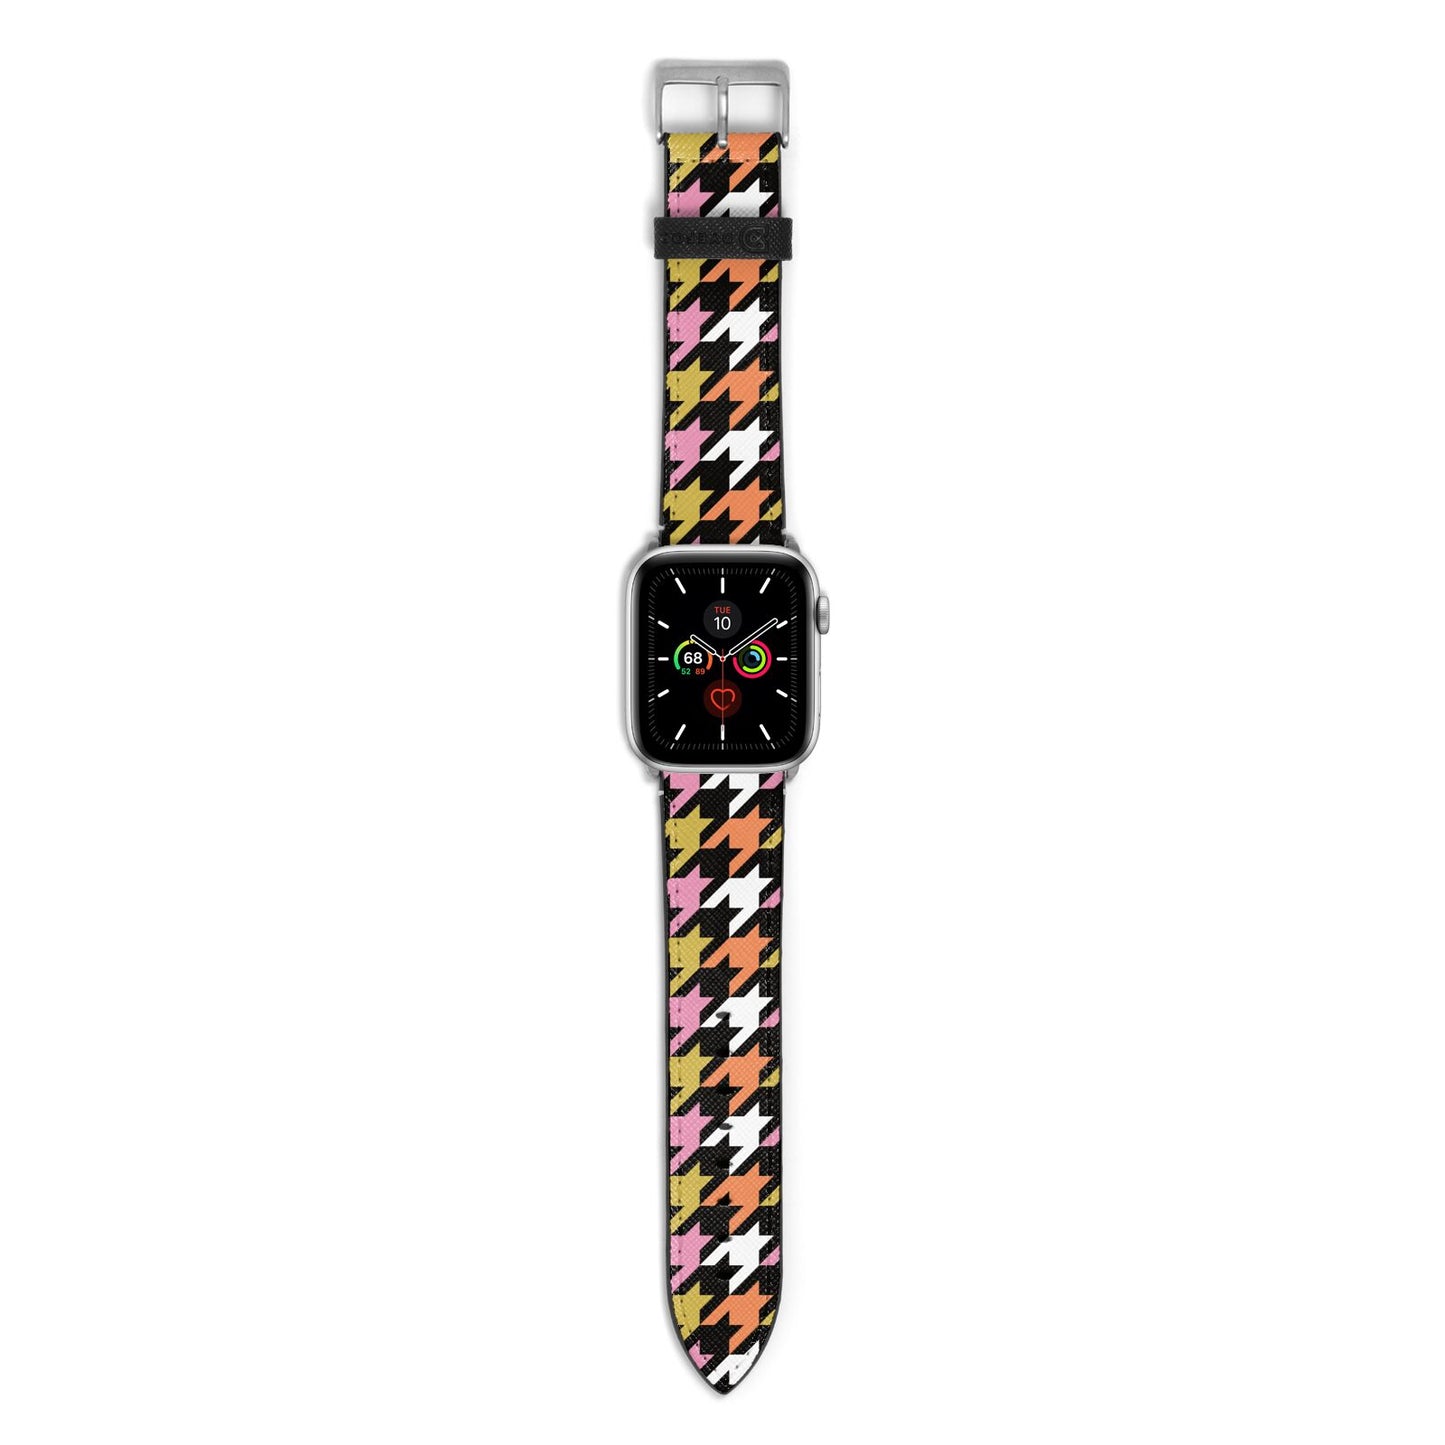 Retro Houndstooth Apple Watch Strap with Silver Hardware